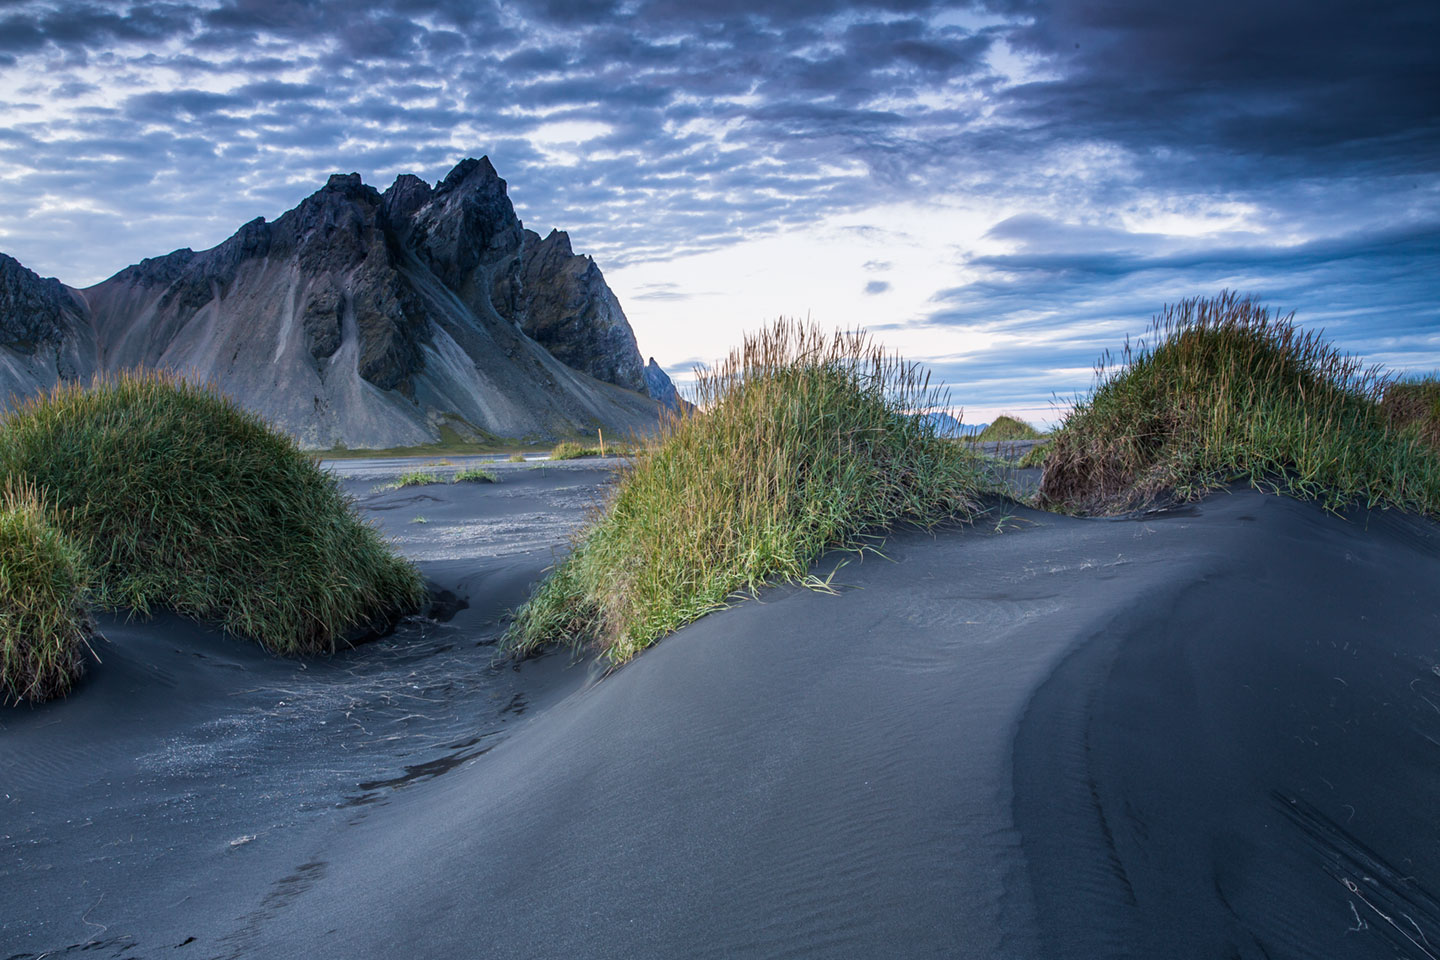 Vesturhorn mountain in Iceland during a travel photography trip in the summer